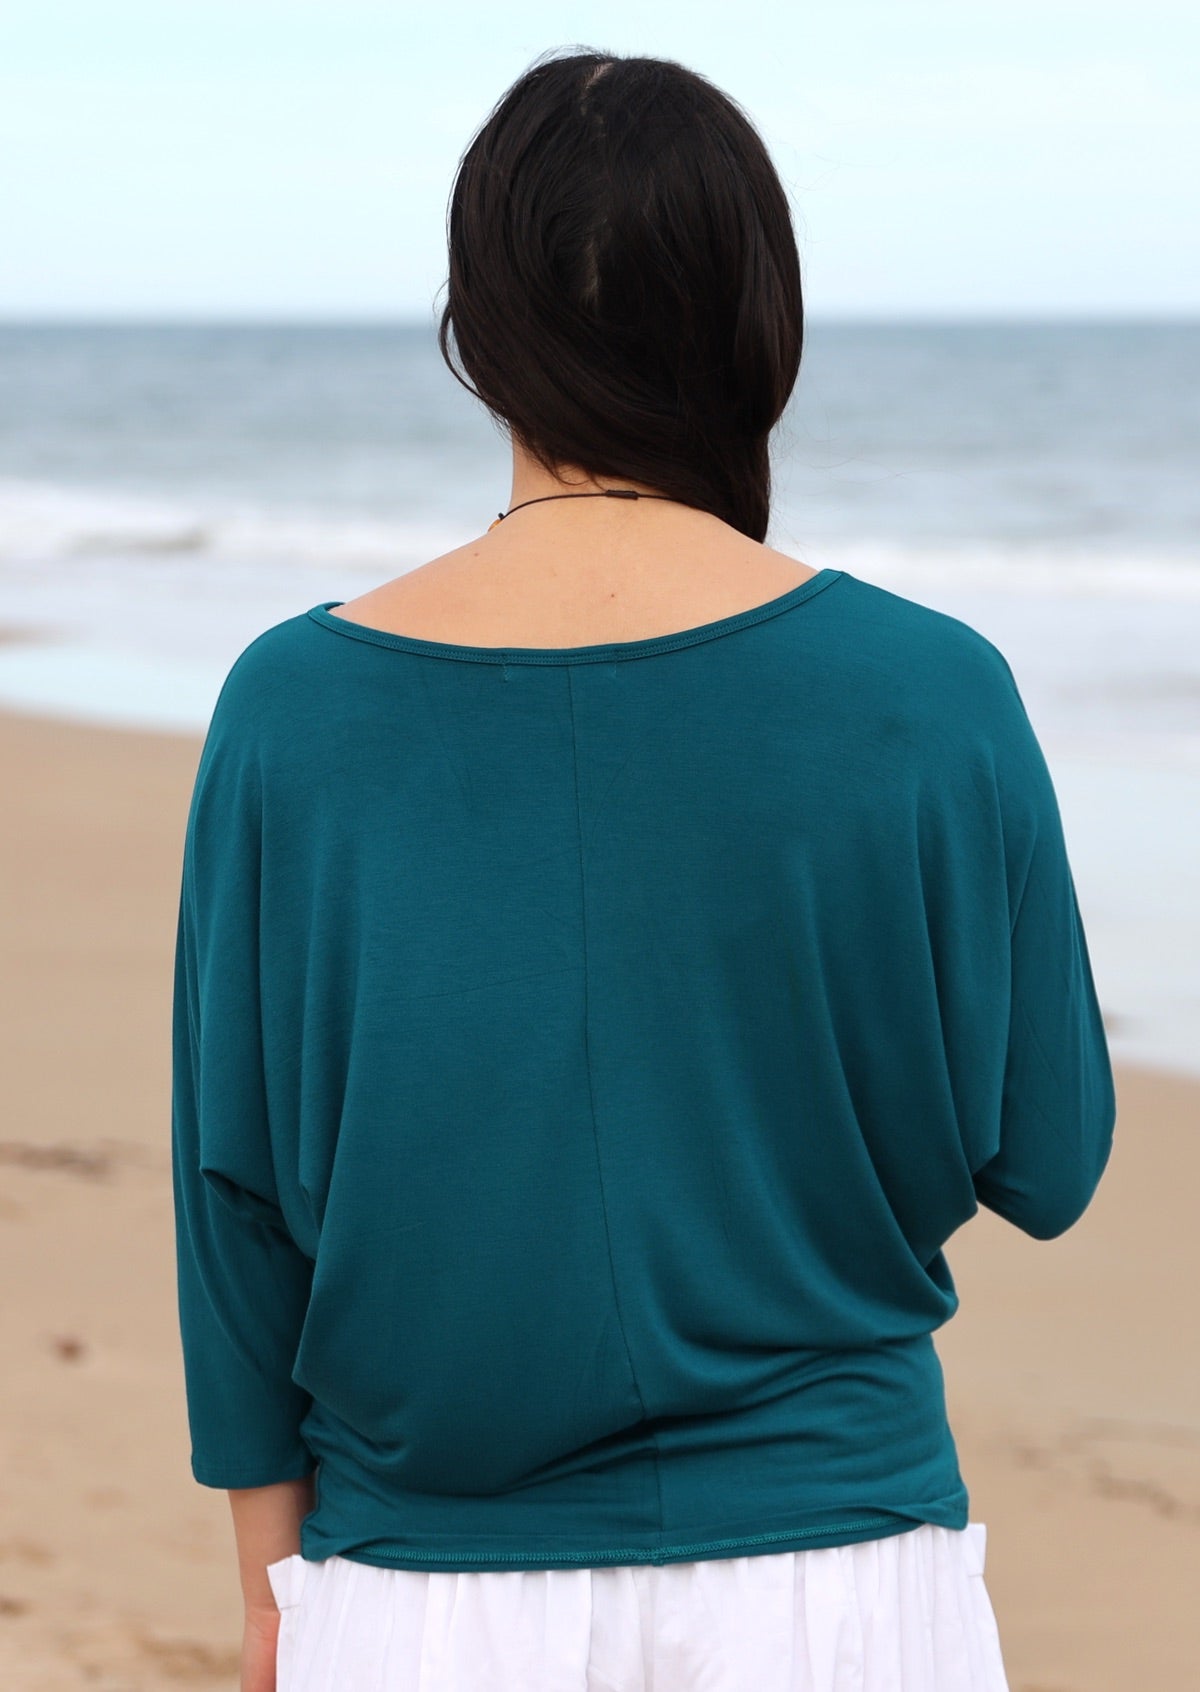 Back view of a woman wearing a 3/4 sleeve rayon batwing round neckline teal top.